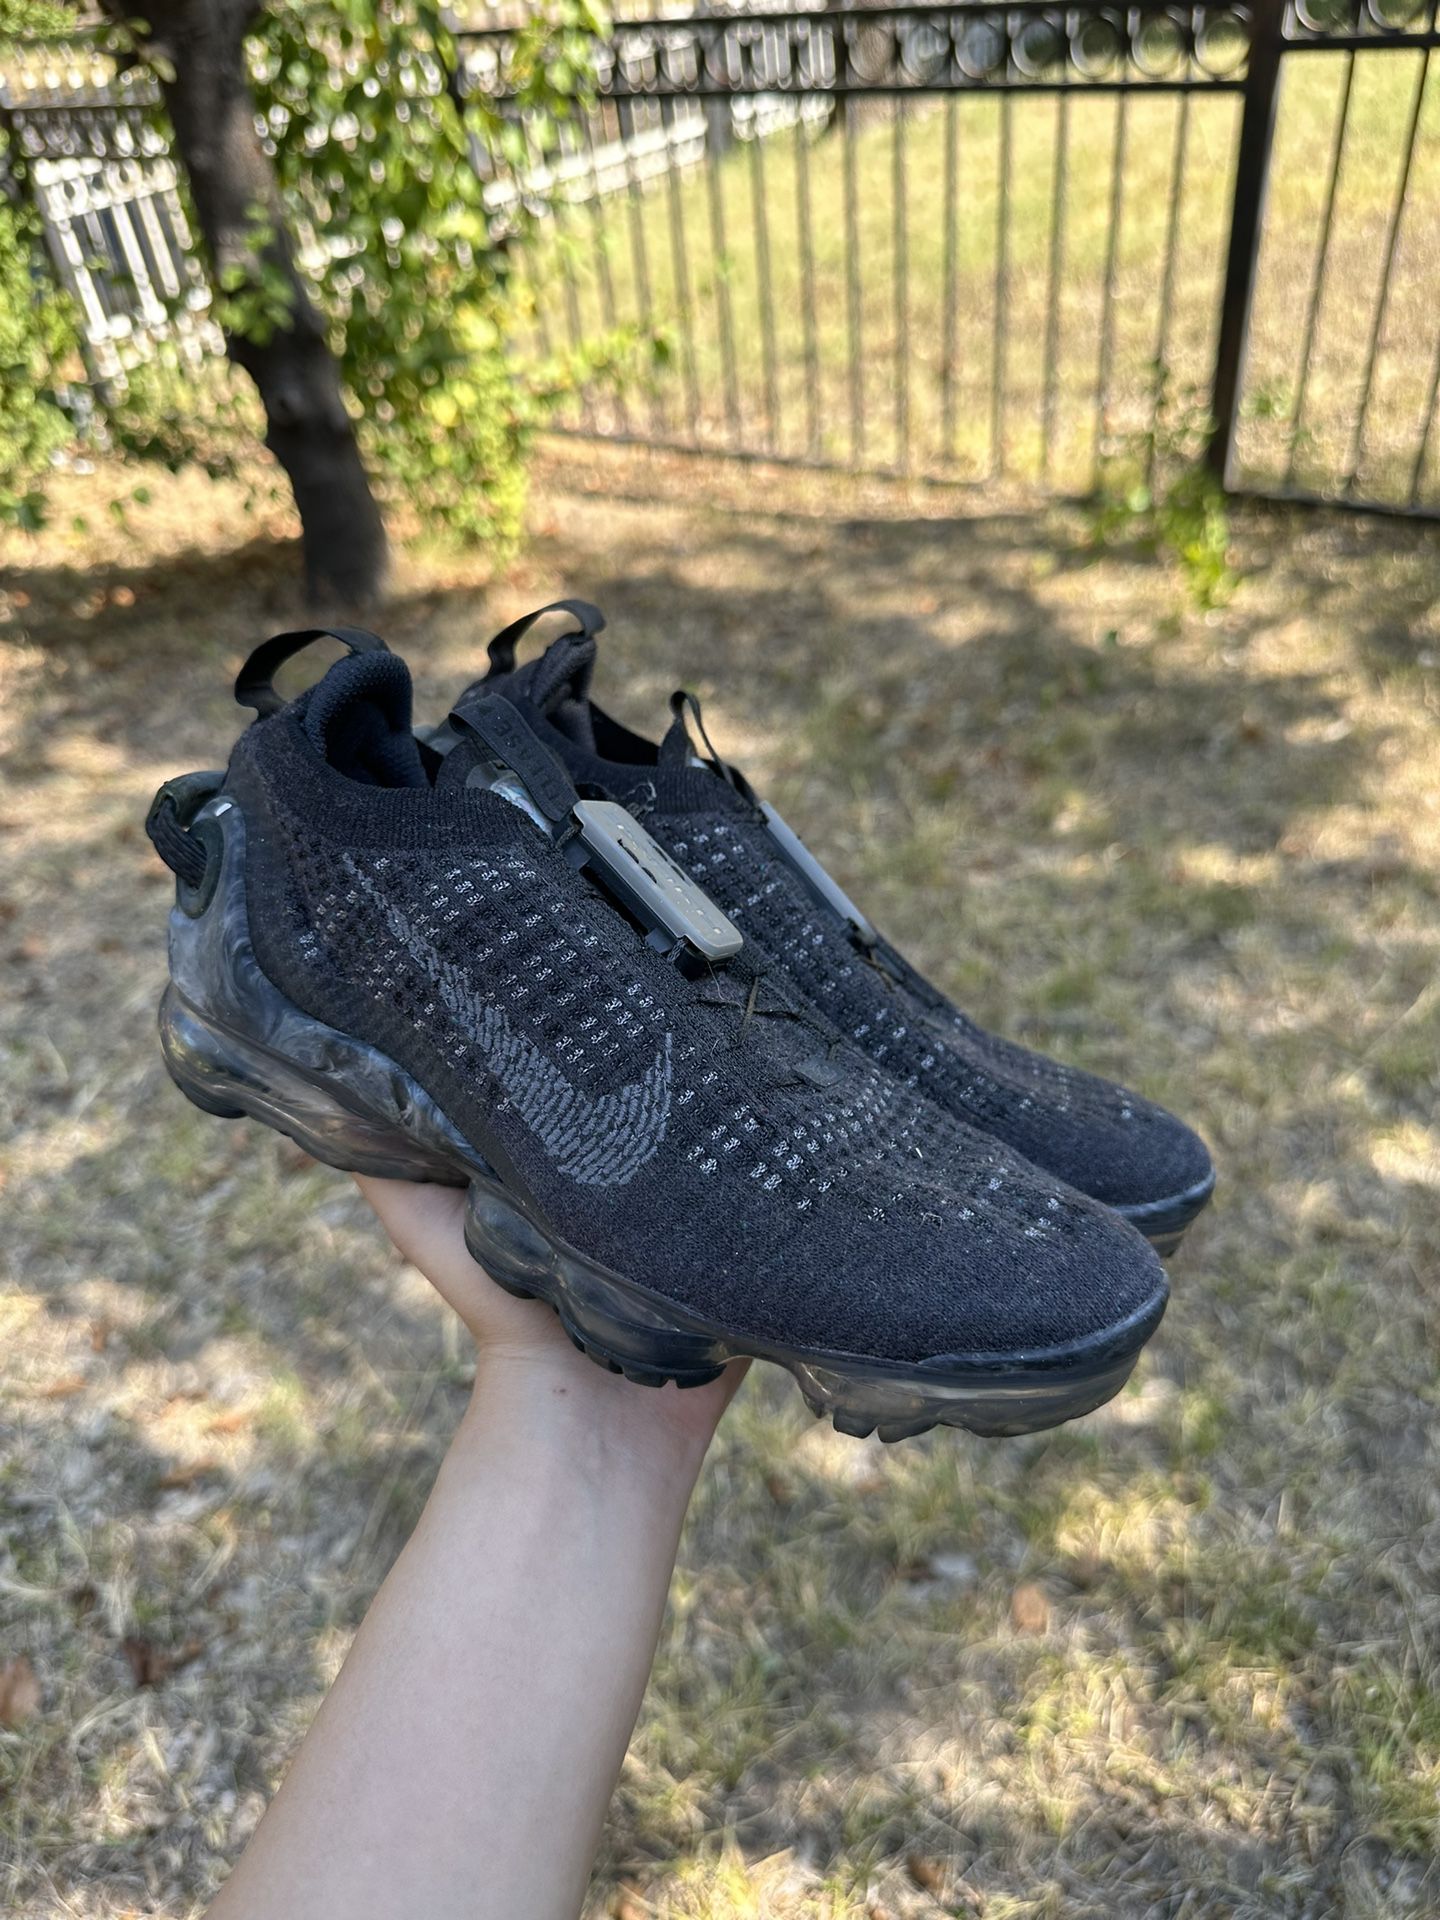 Nike Vapormax 2020 FK for Sale in Mesquite, TX - OfferUp